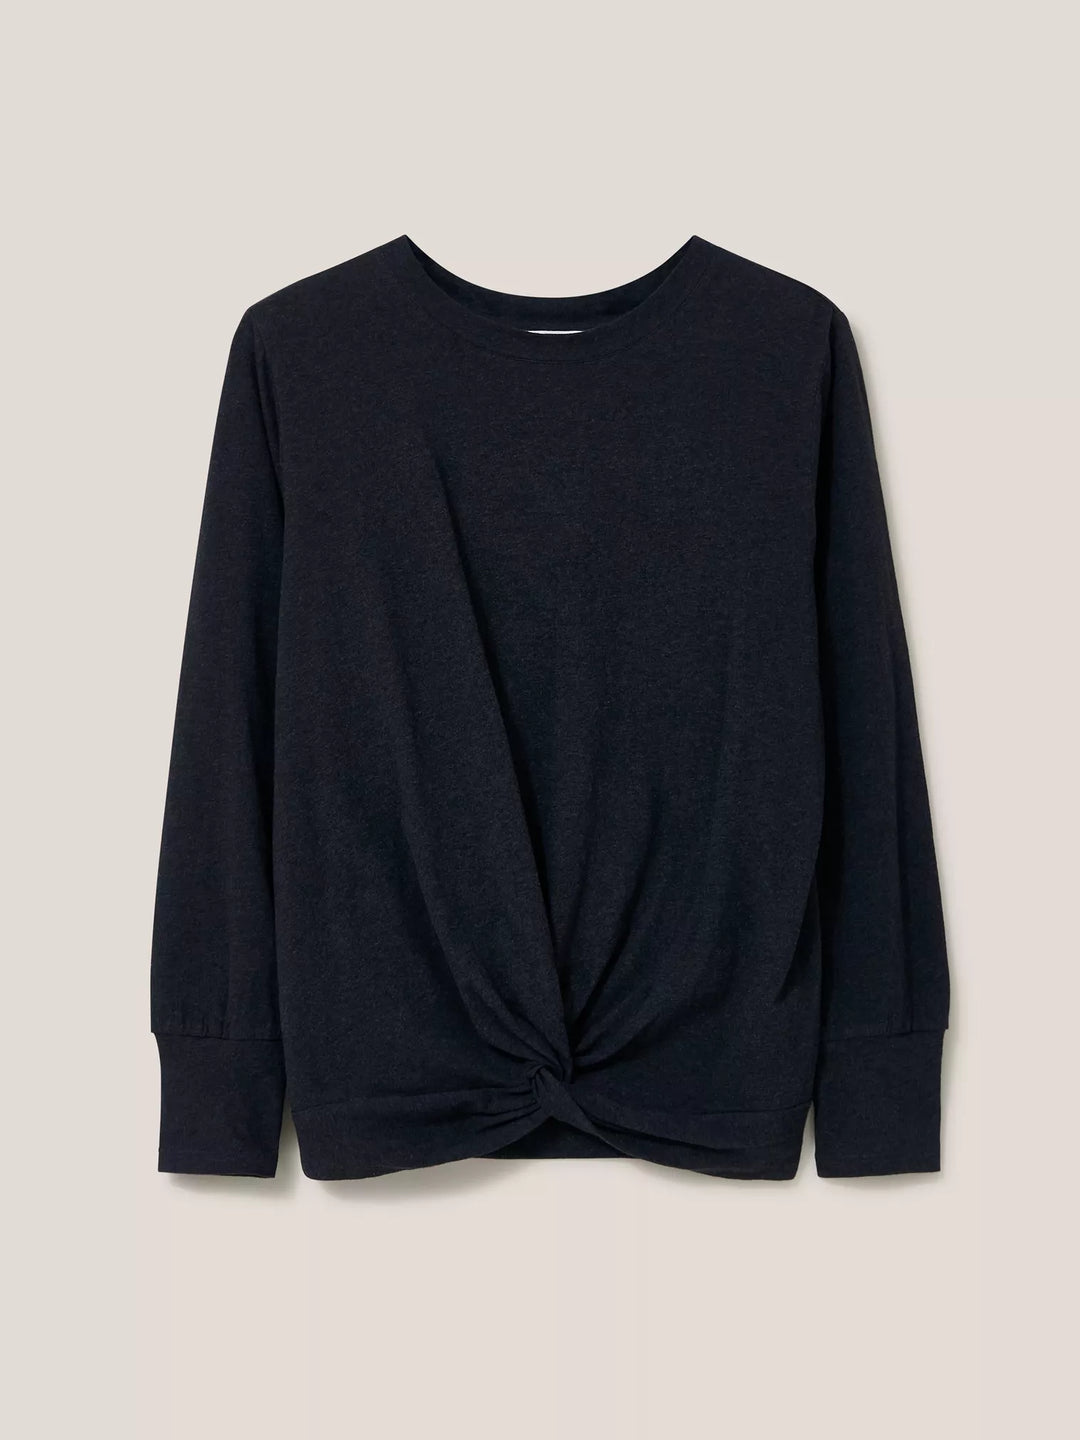 Pull avec noeud aux hanches